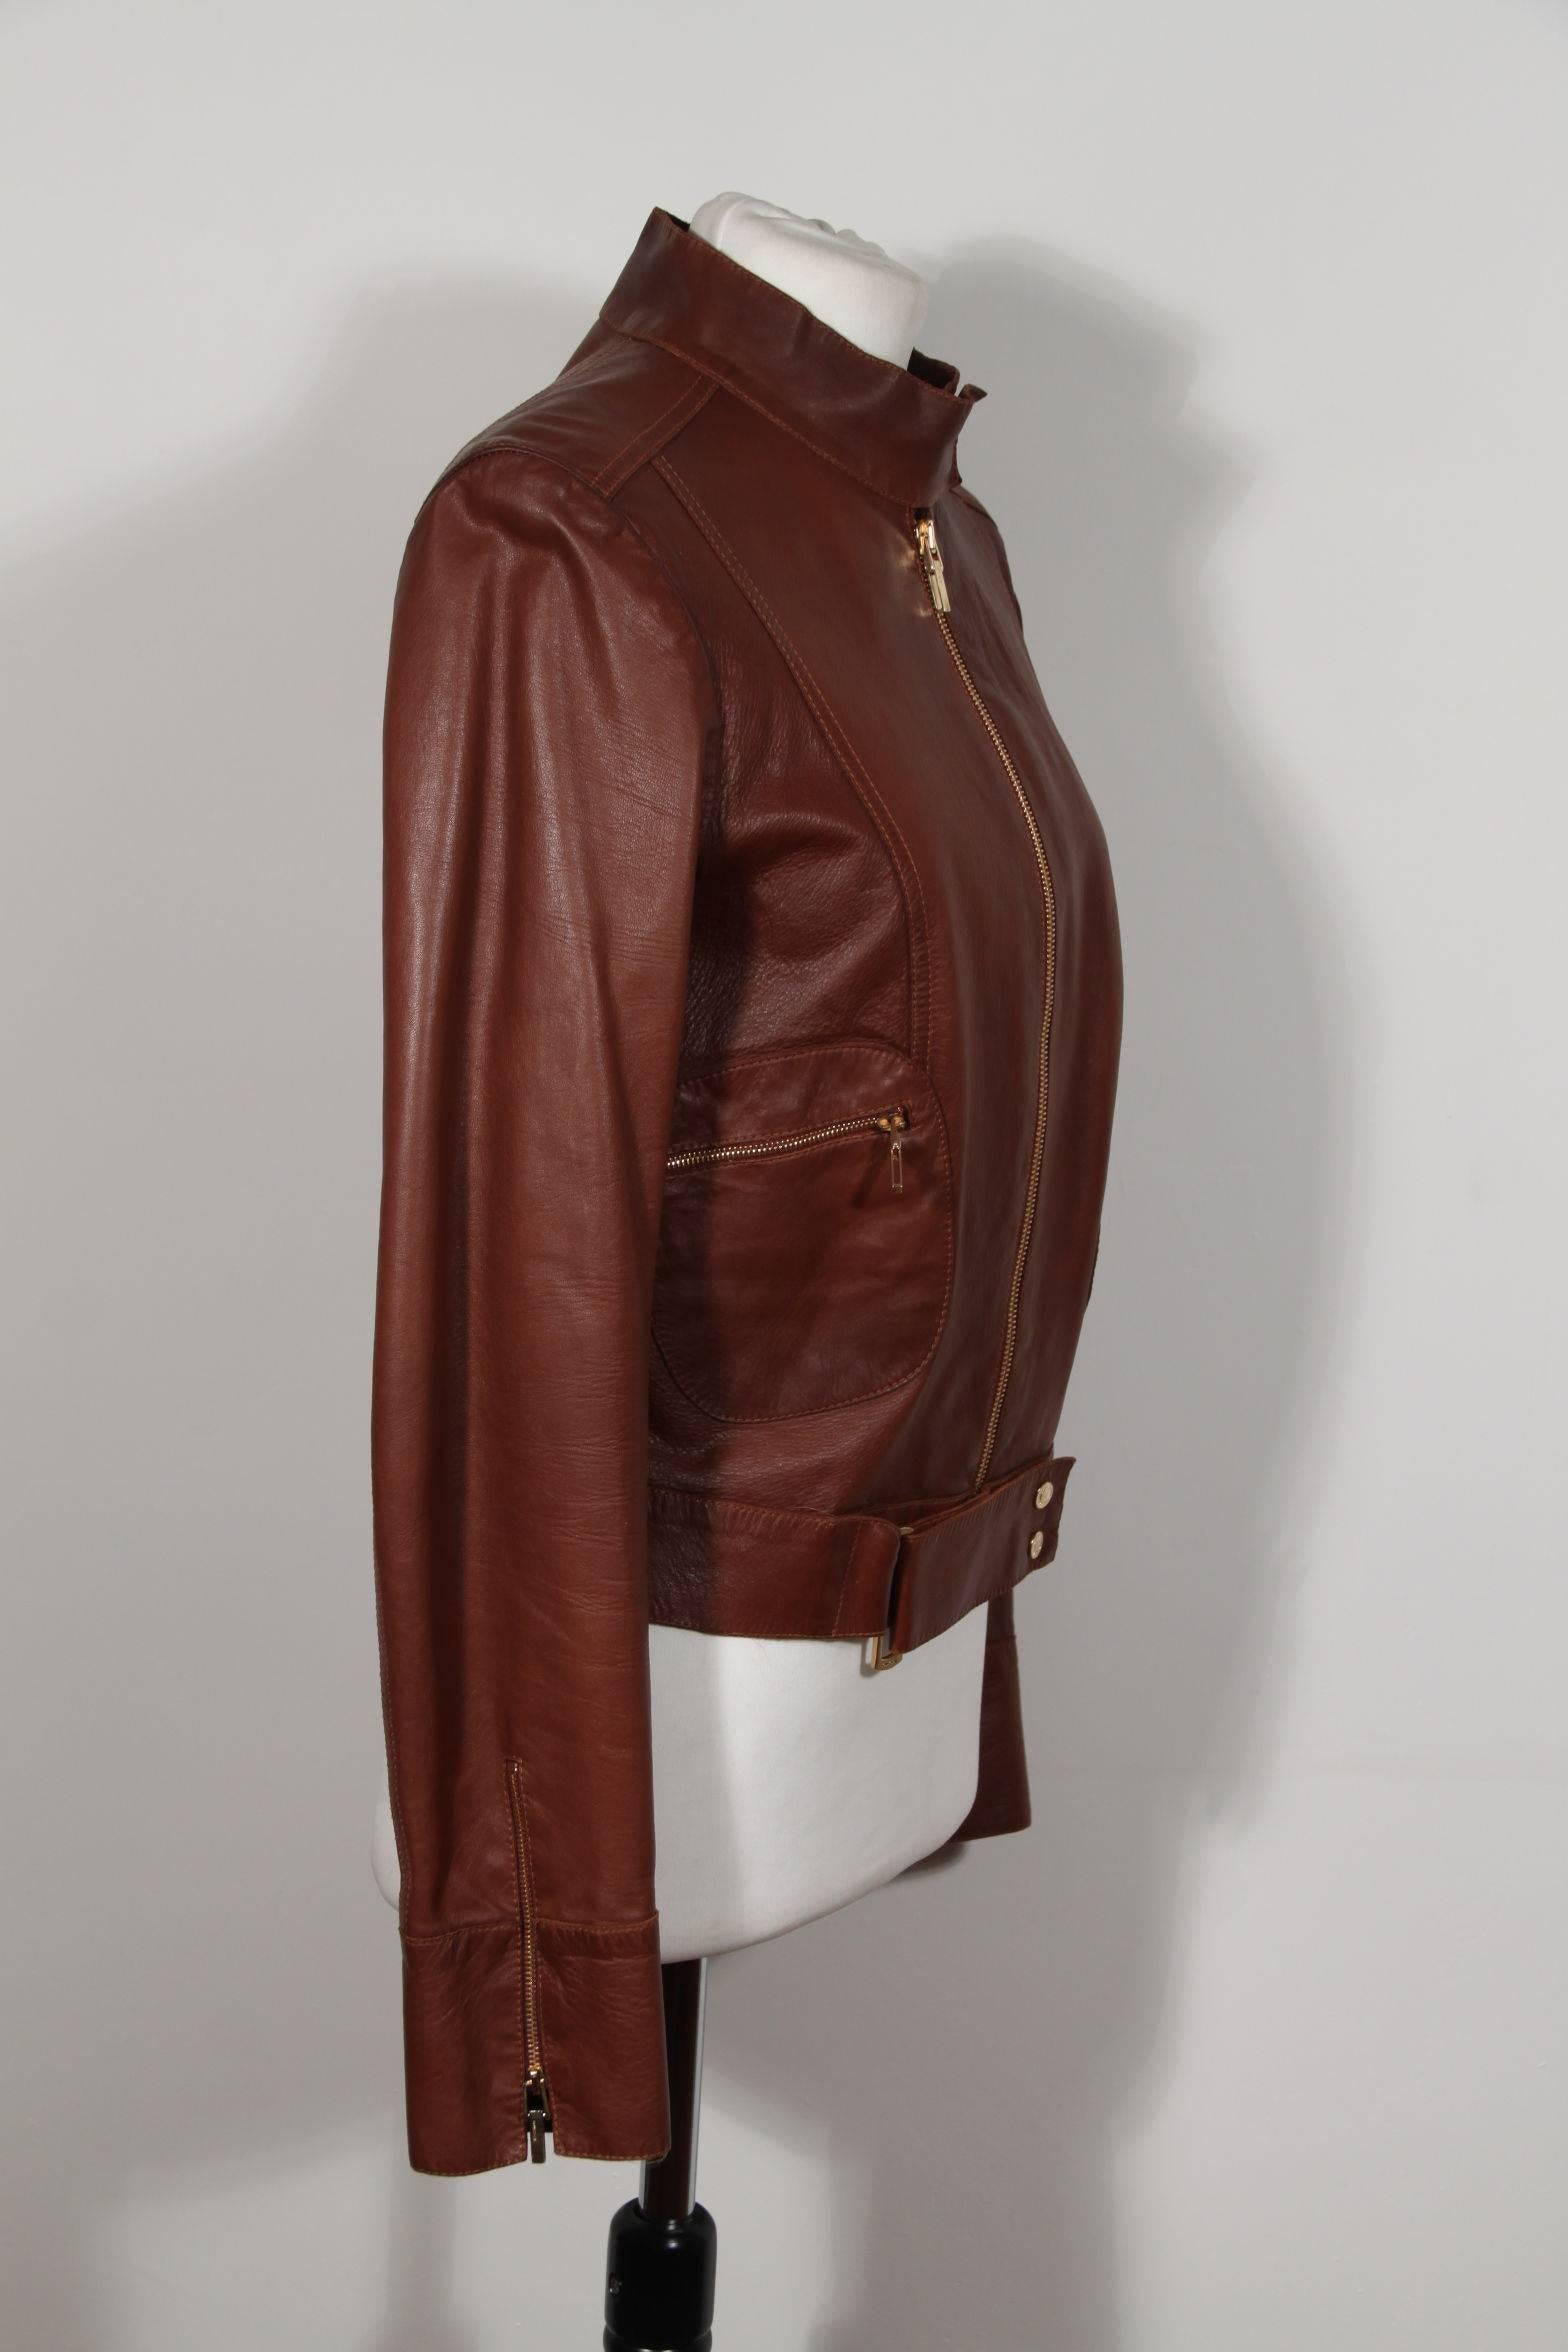 GUCCI TOM FORD Brown LEATHER Biker JACKET Zip Front Sz 40 In Excellent Condition In Rome, Rome